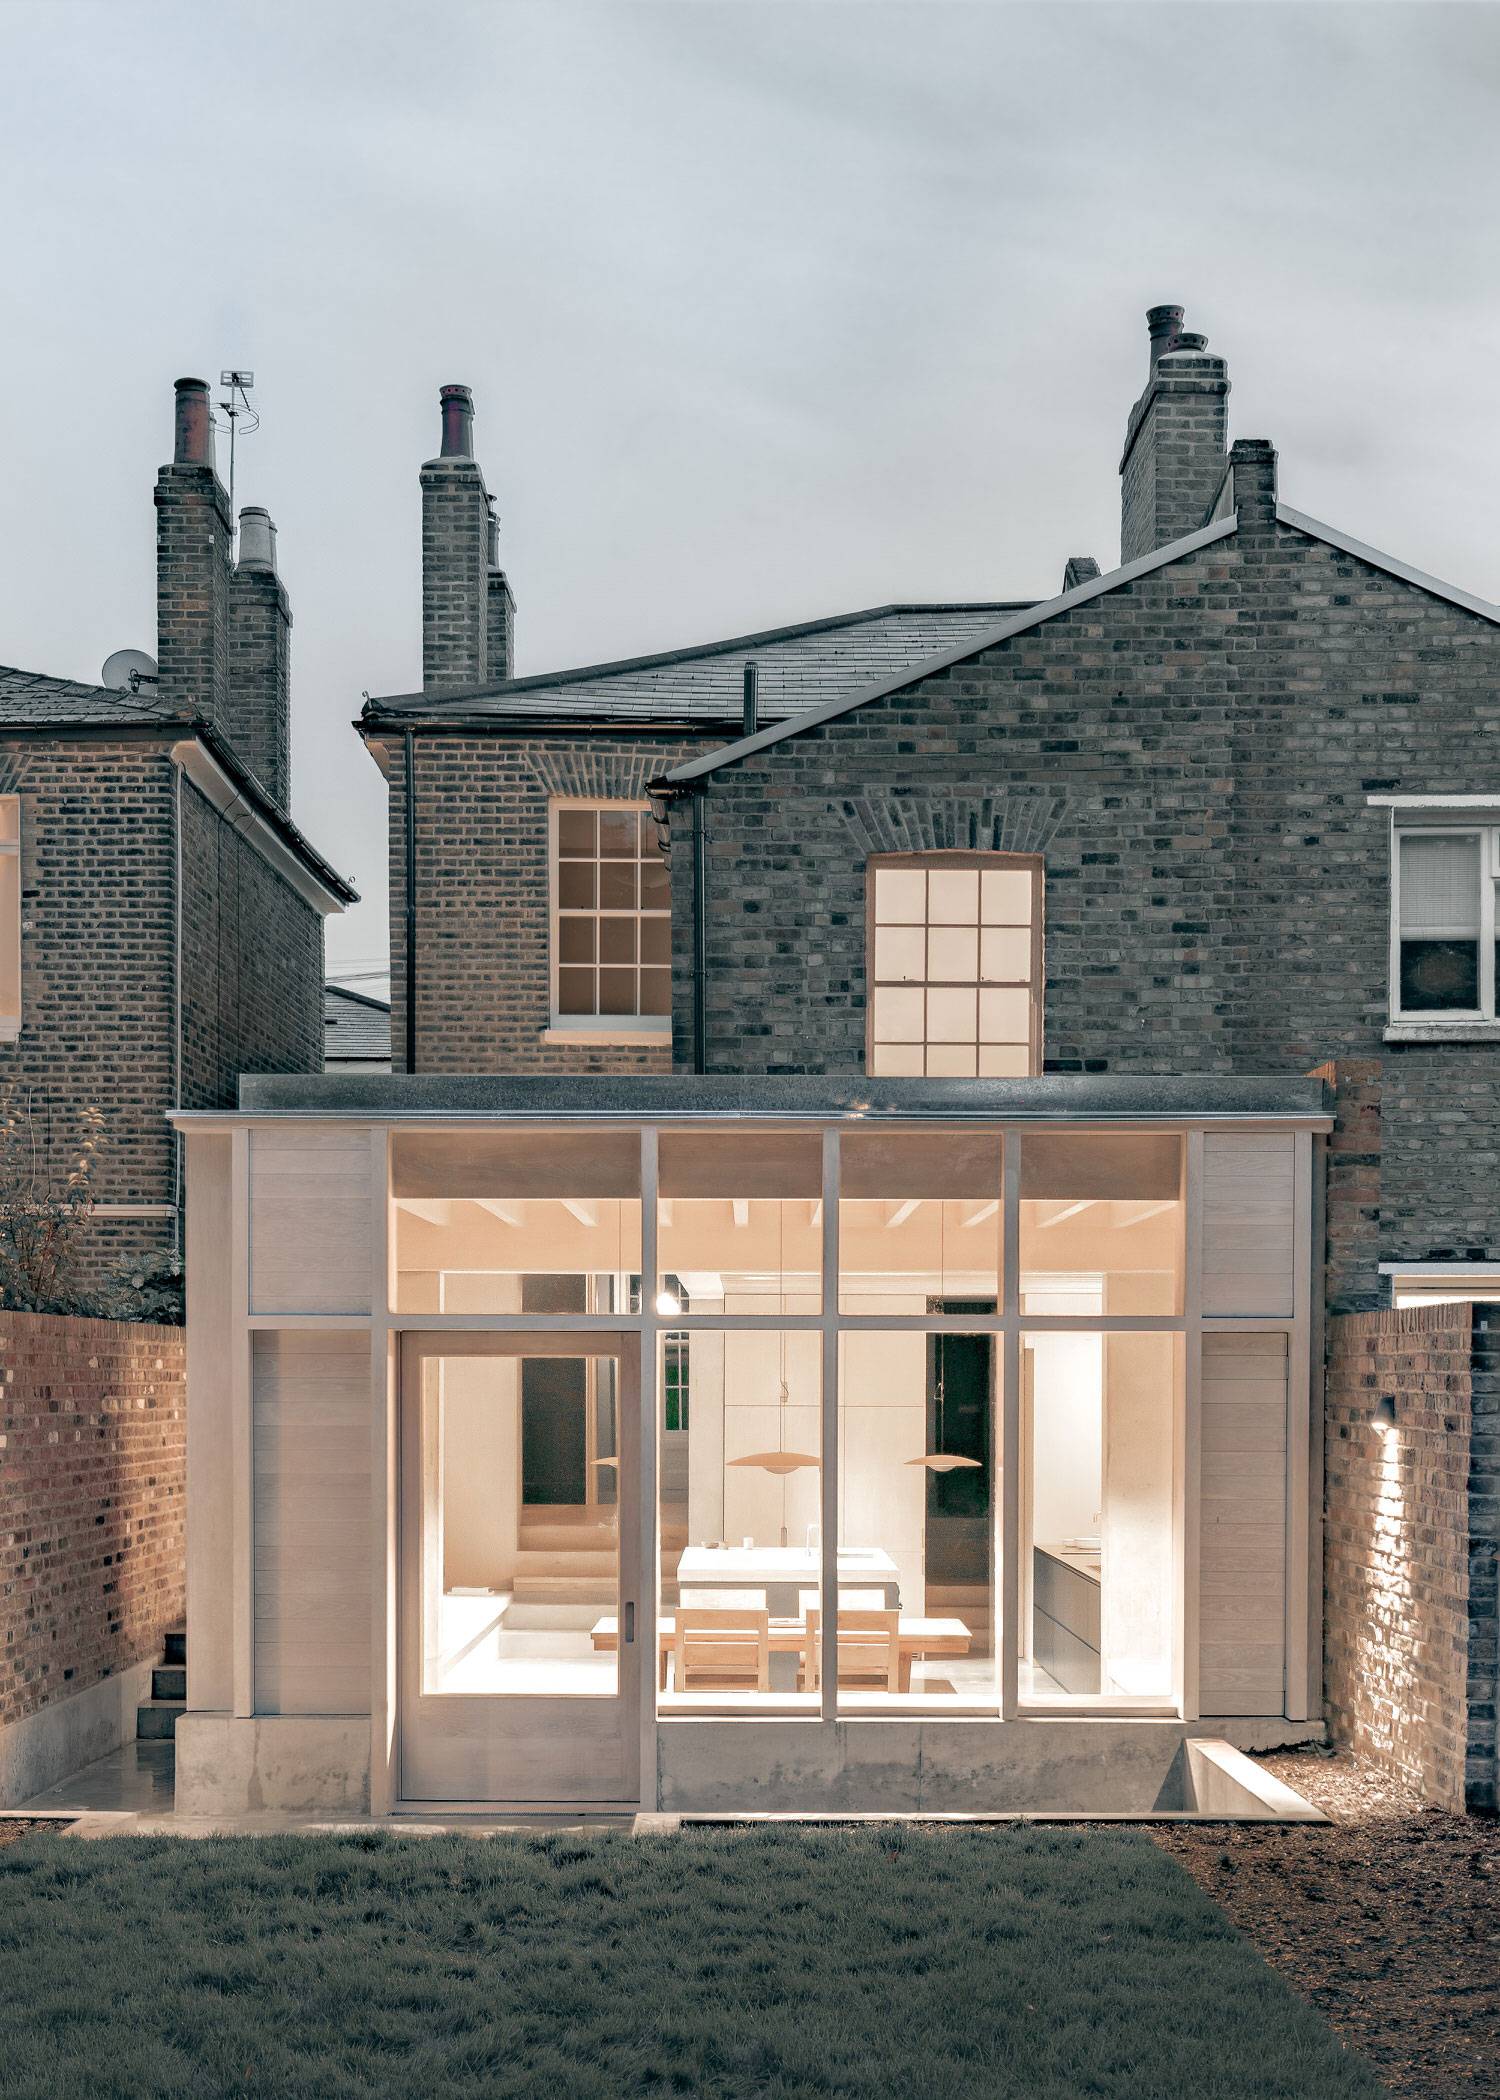 The Two-Storey Victorian House renovated by DGN Studio in London